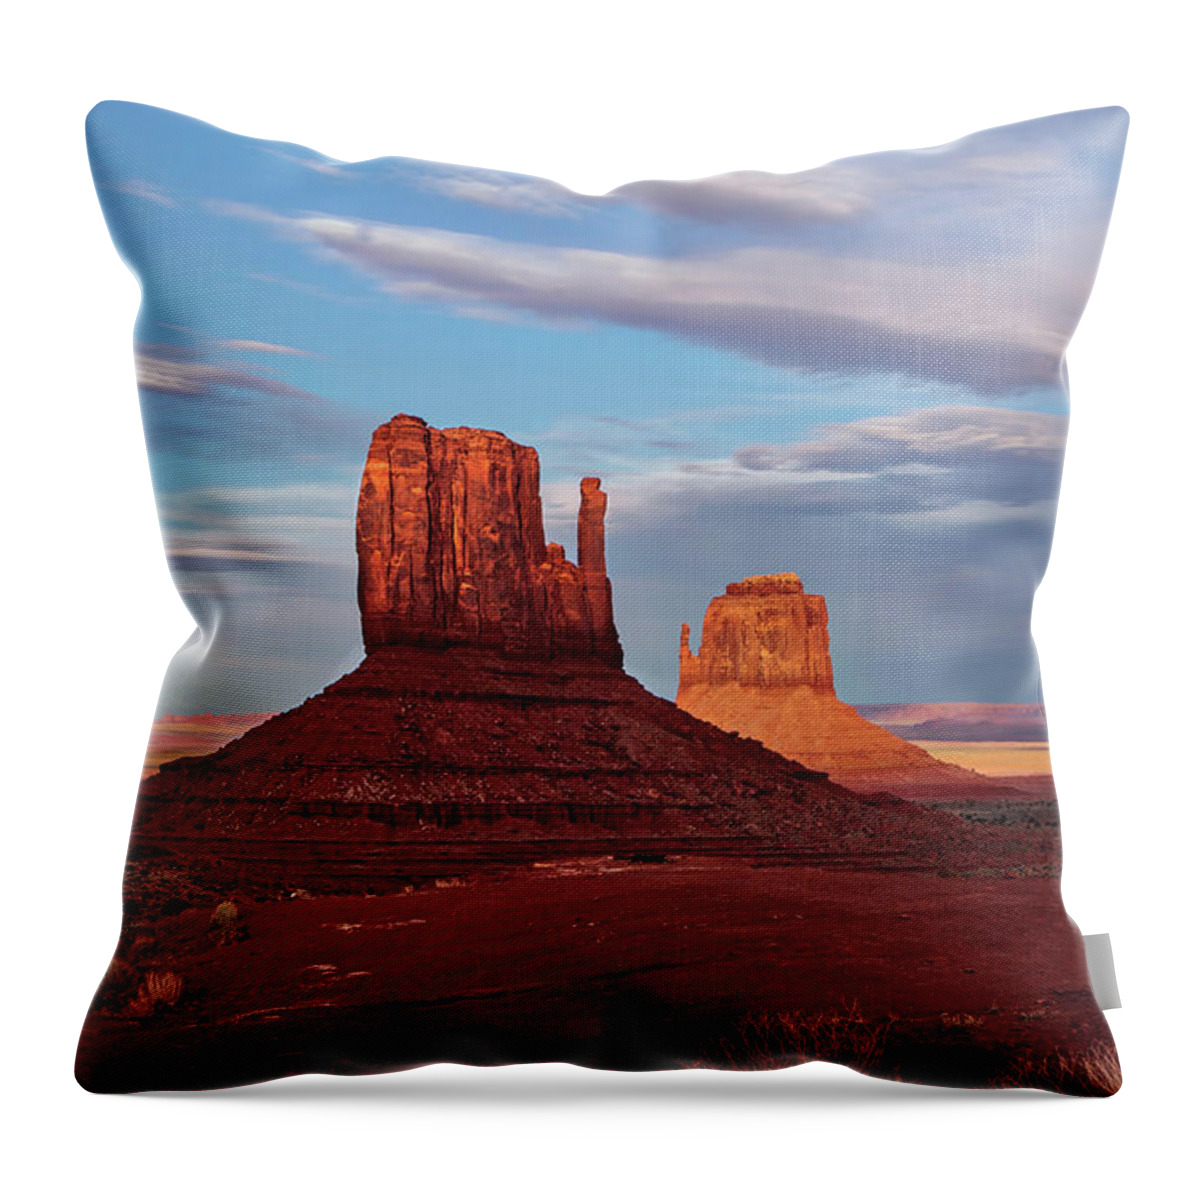 Arizona Throw Pillow featuring the photograph Monument Valley Mittens by Peter Tellone